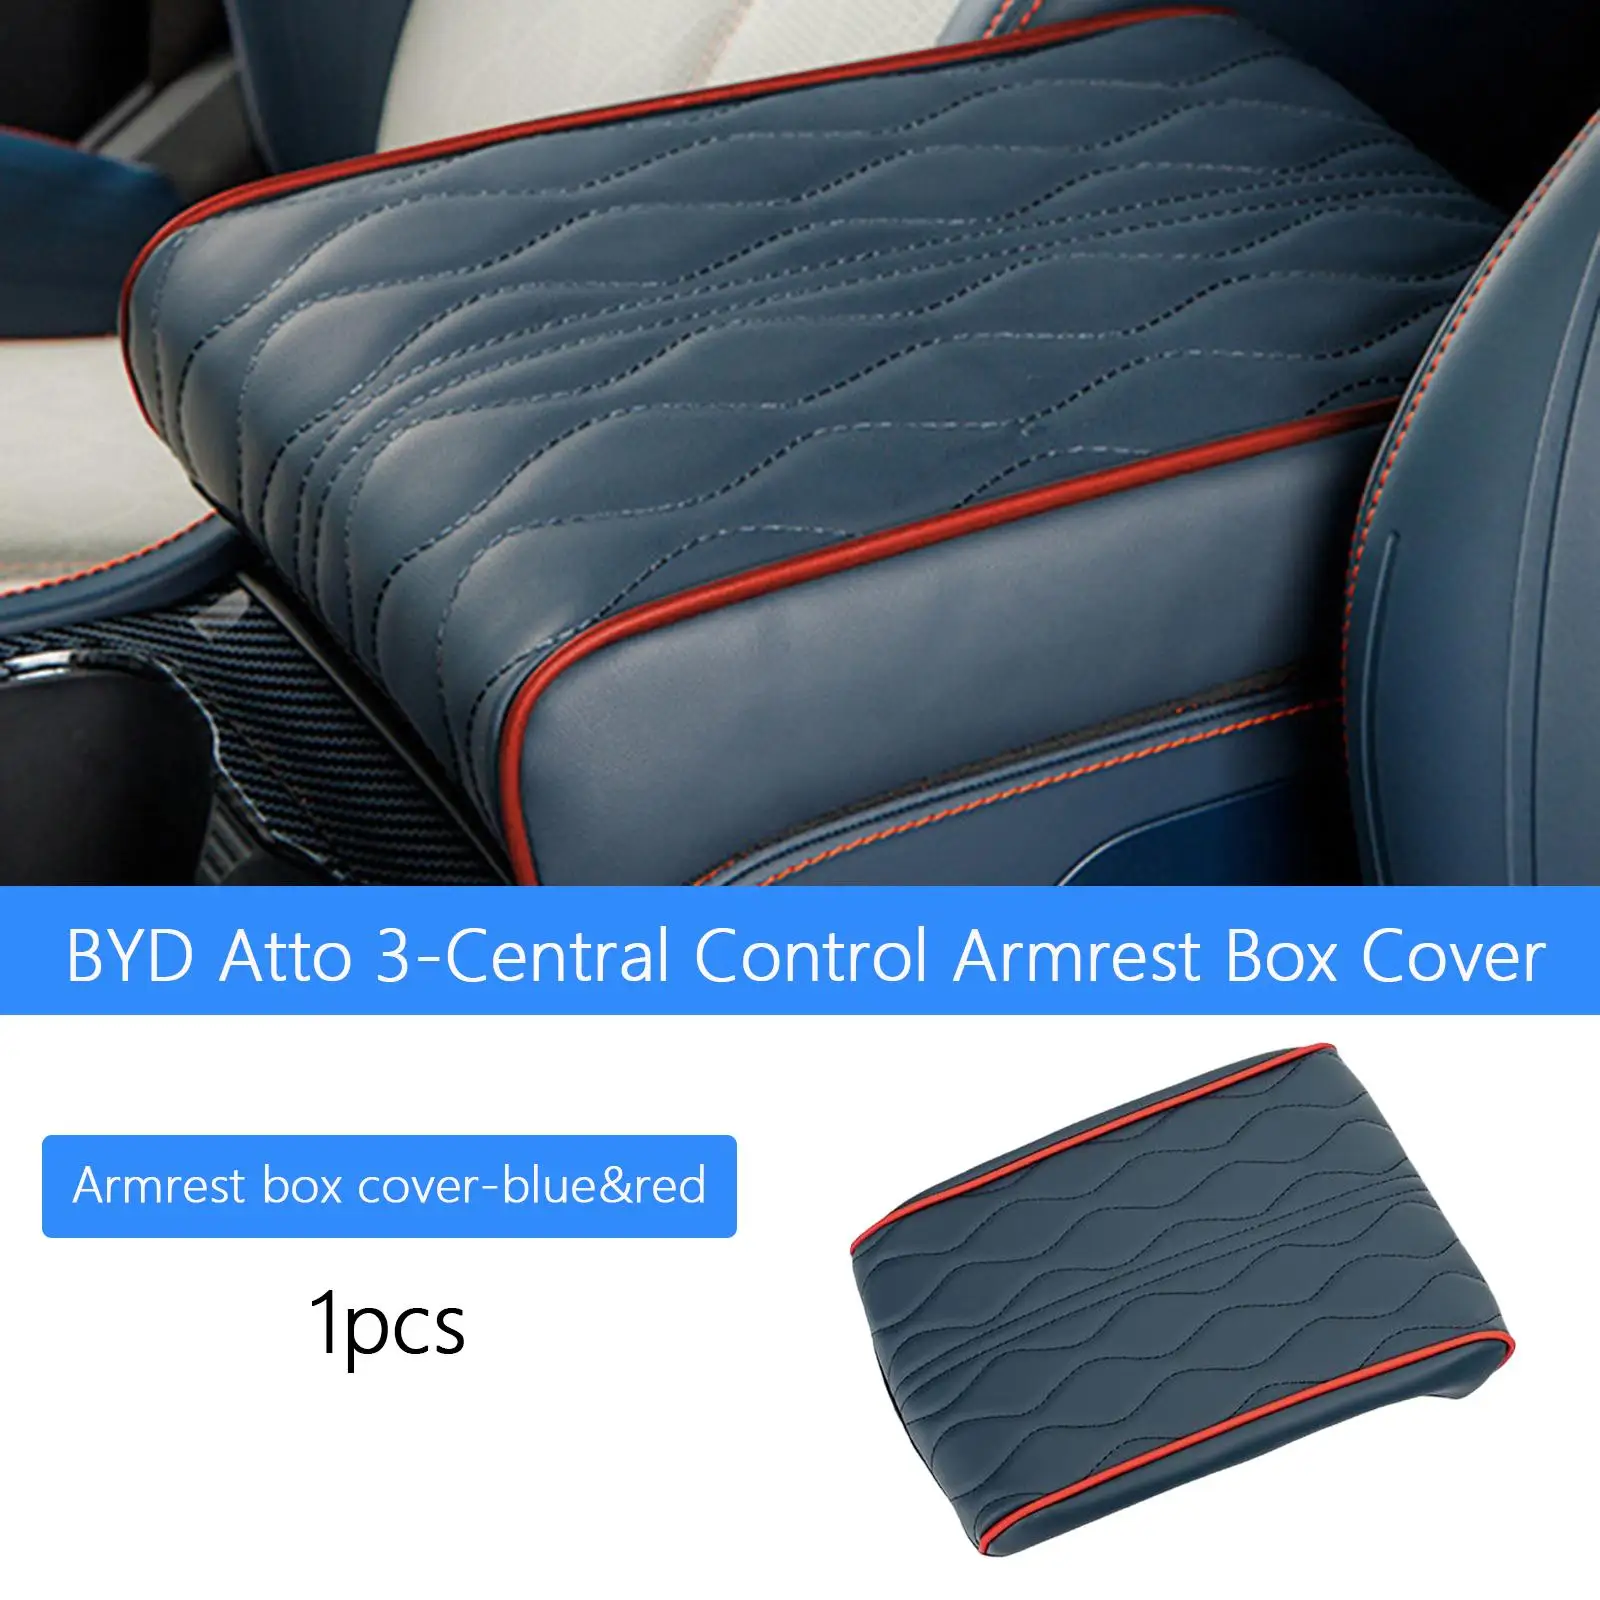 Car Armrest Cushion Cover Pad Decor Parts Protector for Byd Atto 3